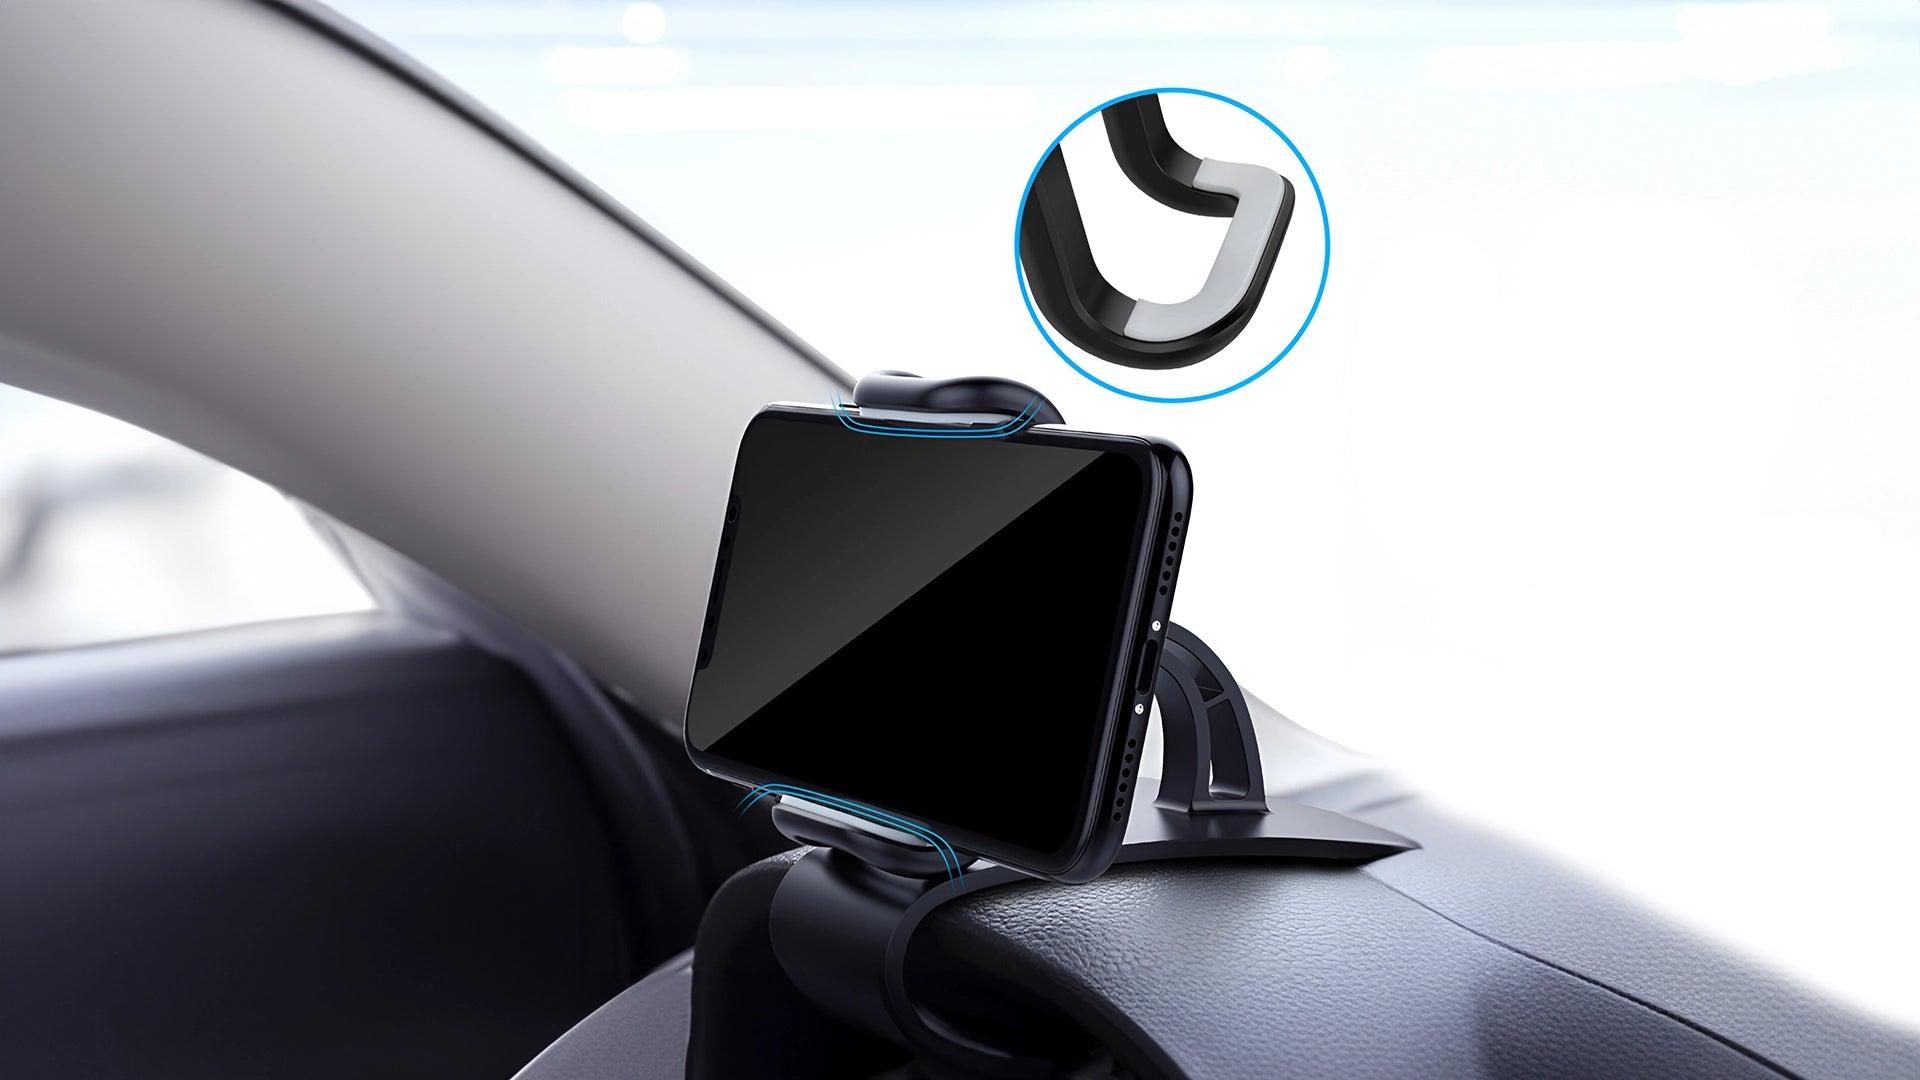 CarPlay screen mounted on a dashboard stand with a flexible gooseneck, providing a customizable viewing angle for the driver.